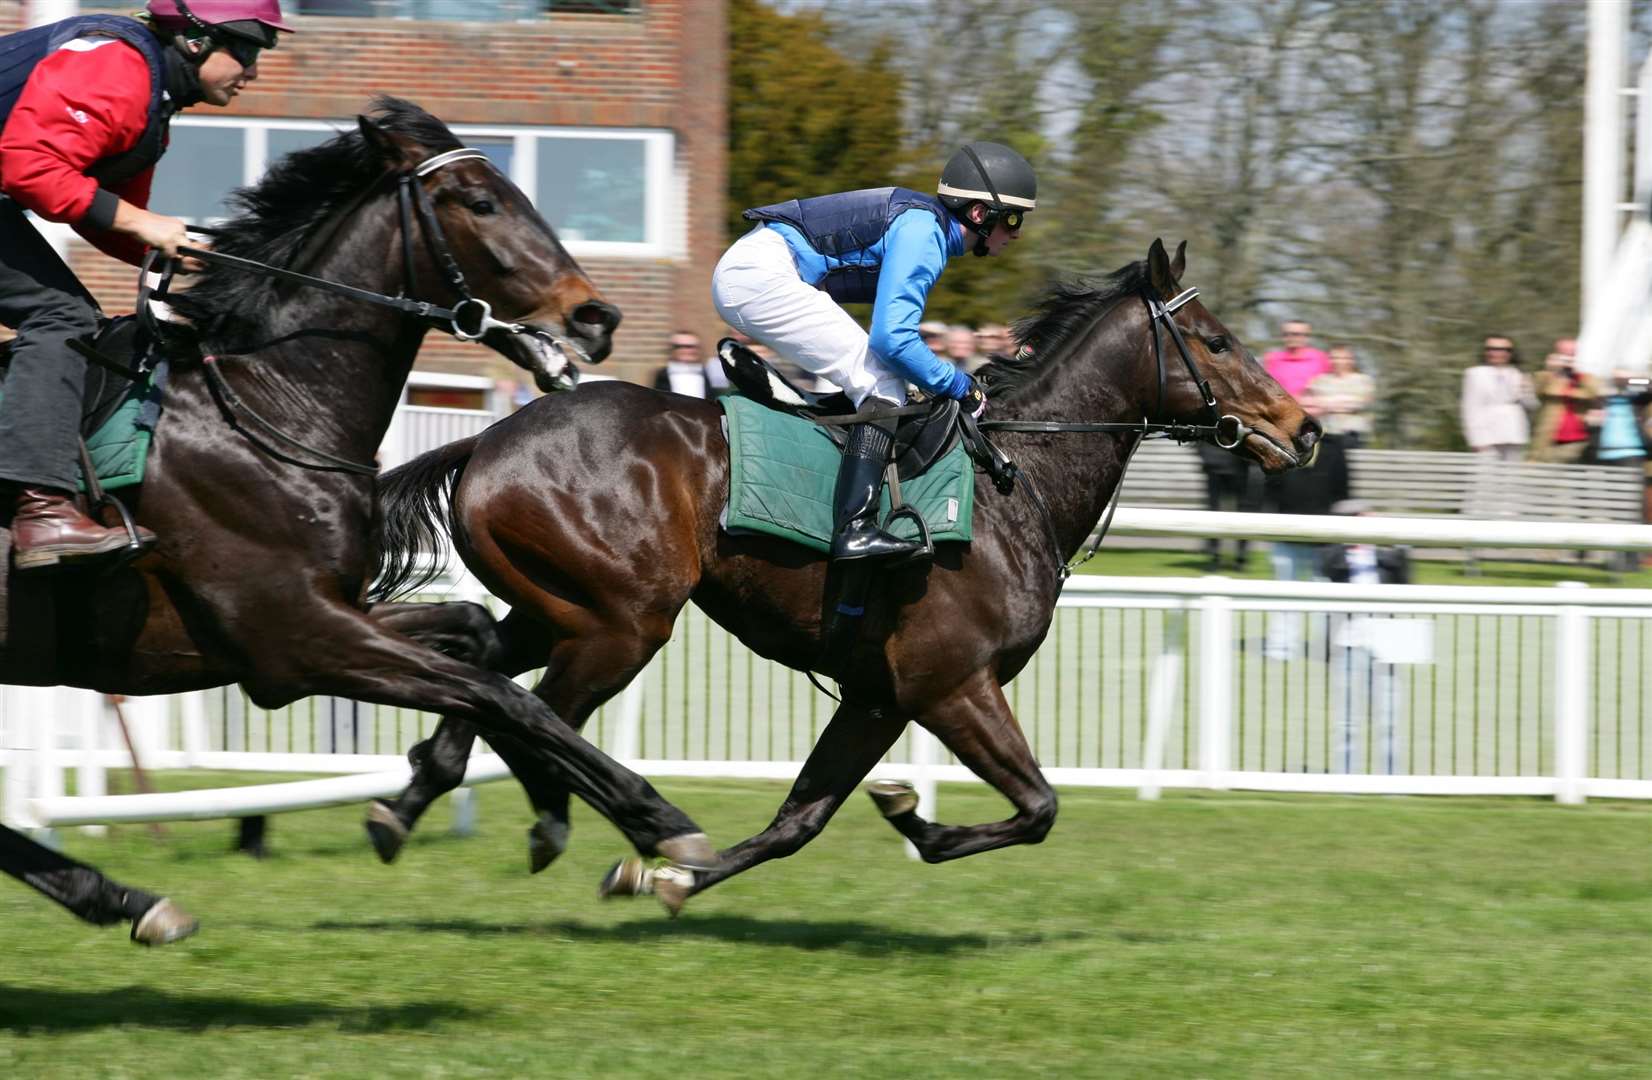 'Stone of Folca' ridden by William Carson – grandson of Willy Carson – in April 2010